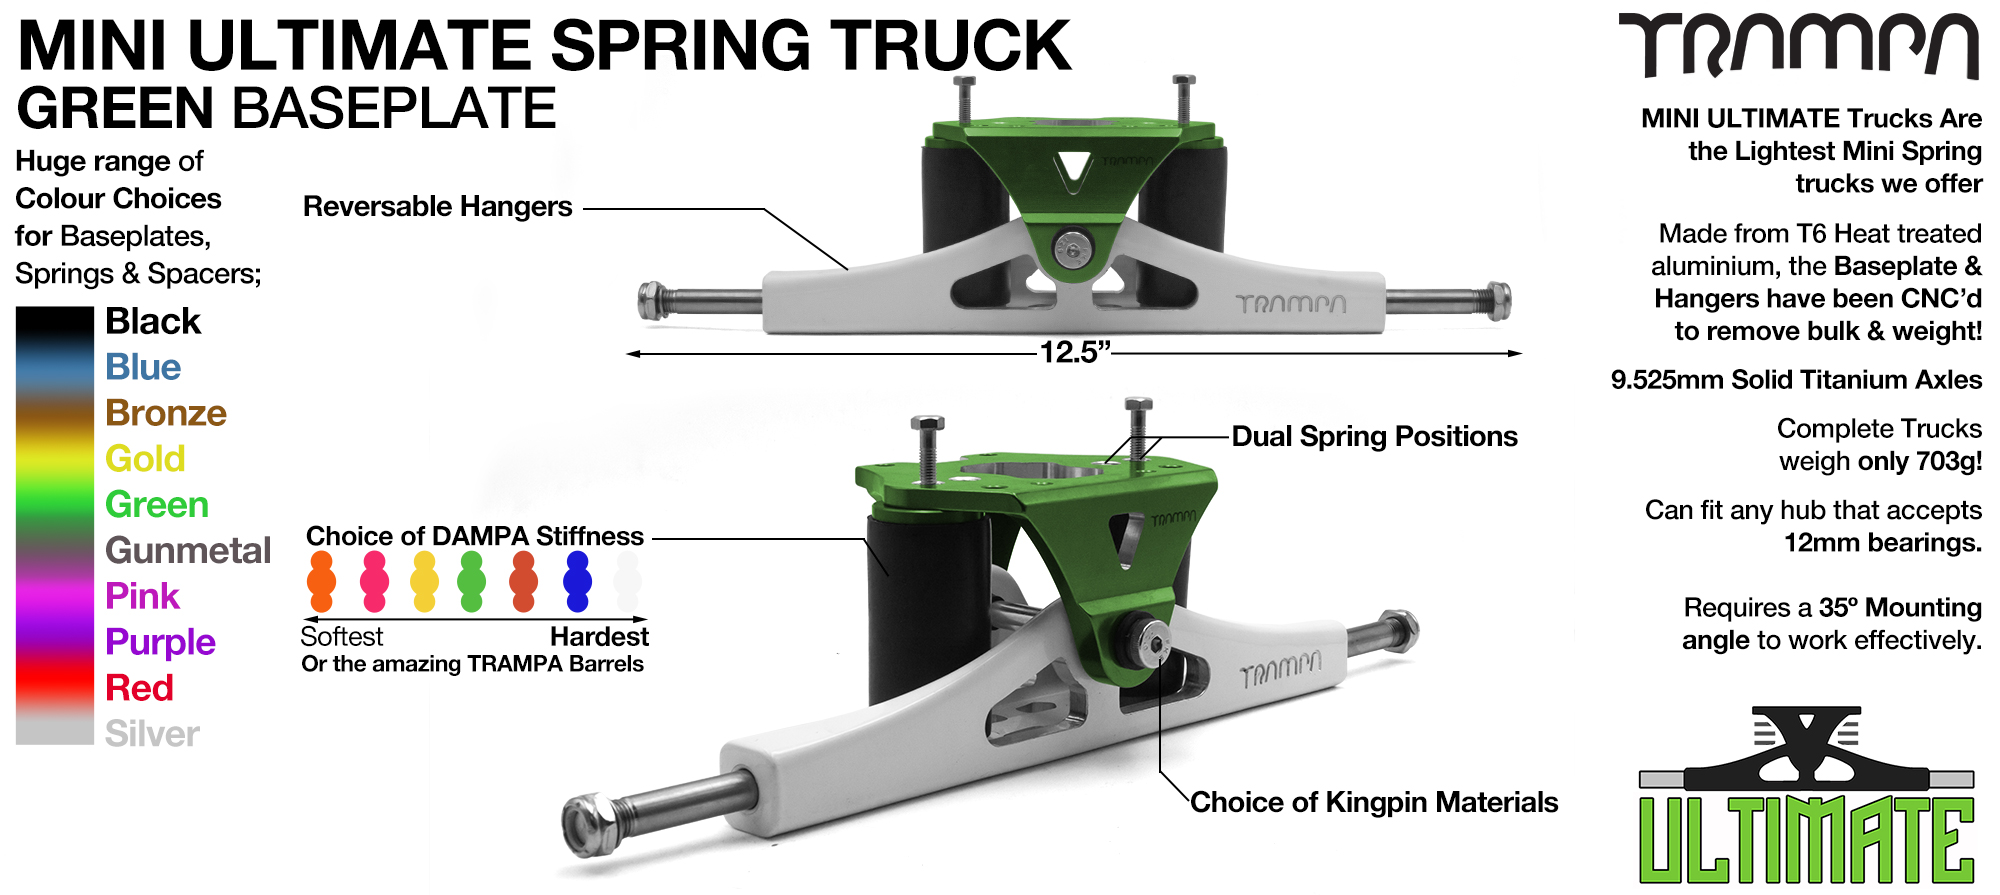 Mini ULTIMATE TRAMPA TRUCKS - CNC FORGED Channel Hanger with 9.525mm TITANIUM Axle CNC Baseplate TITANIUM Kingpin - GREEN